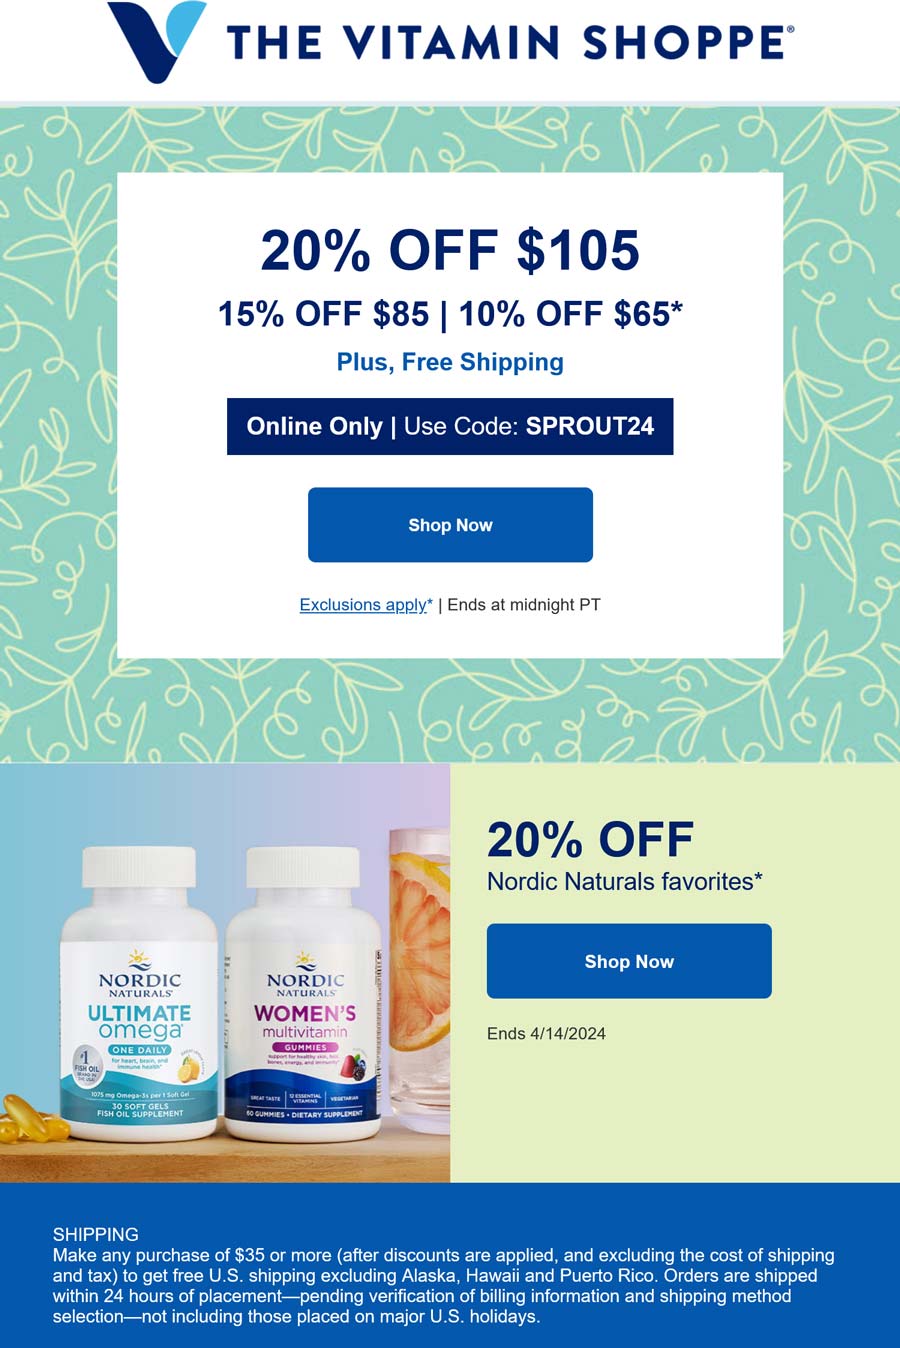 The Vitamin Shoppe stores Coupon  10-20% off $65+ online today at The Vitamin Shoppe via promo code SPROUT24 #thevitaminshoppe 